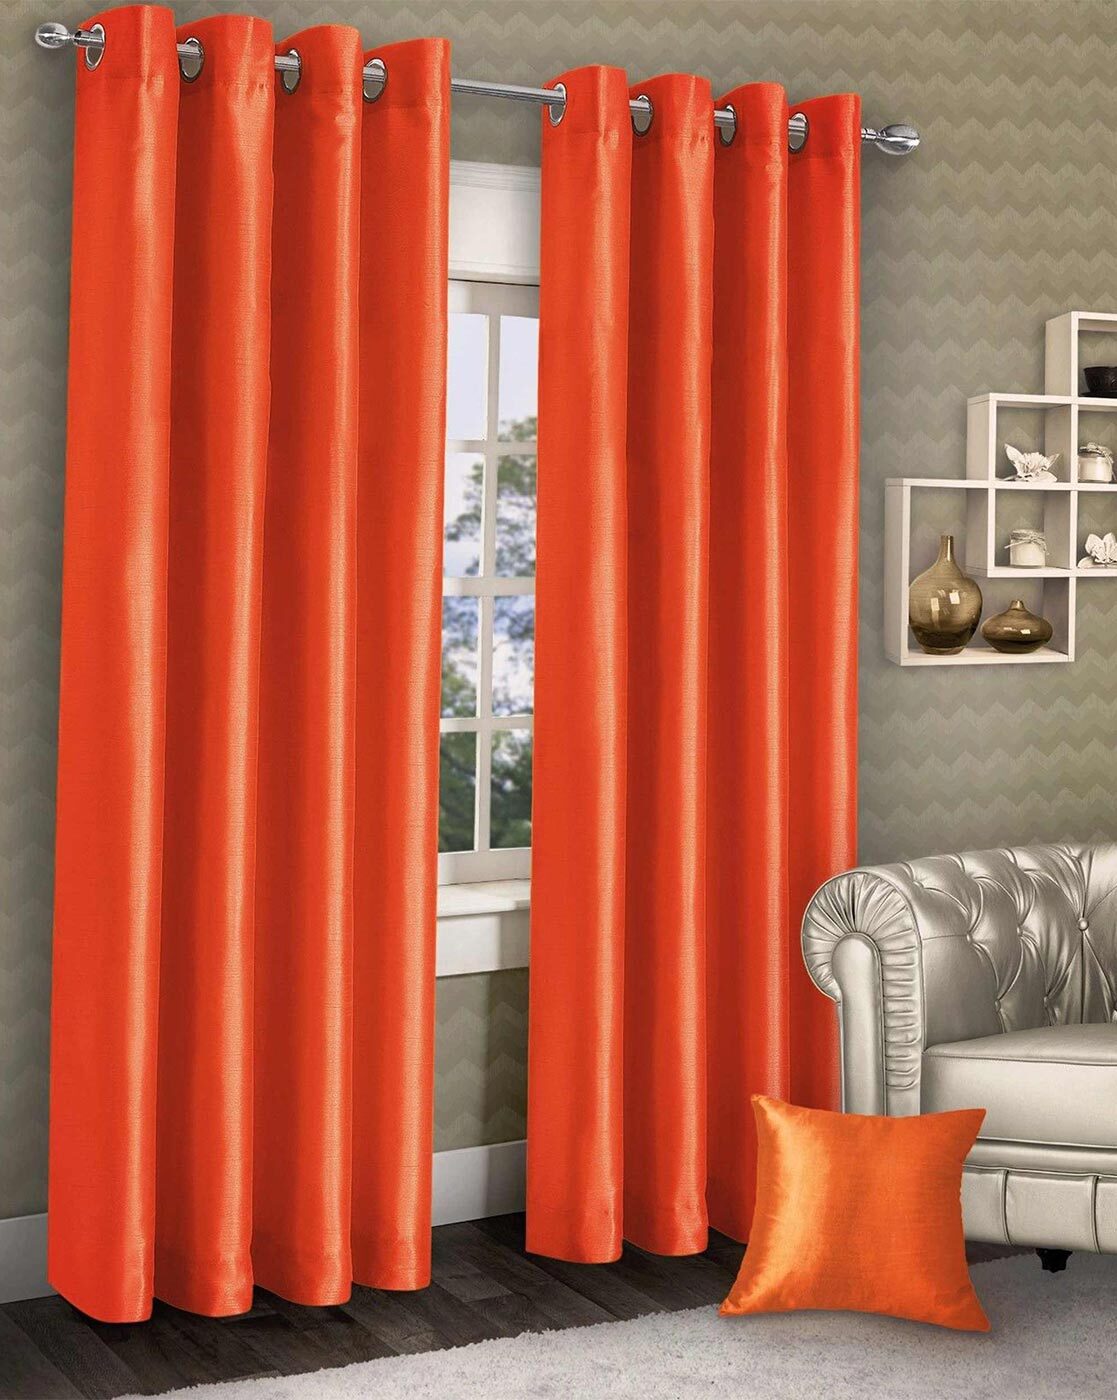 Buy Orange Curtains Accessories For Home Kitchen By R Home Online Ajiocom